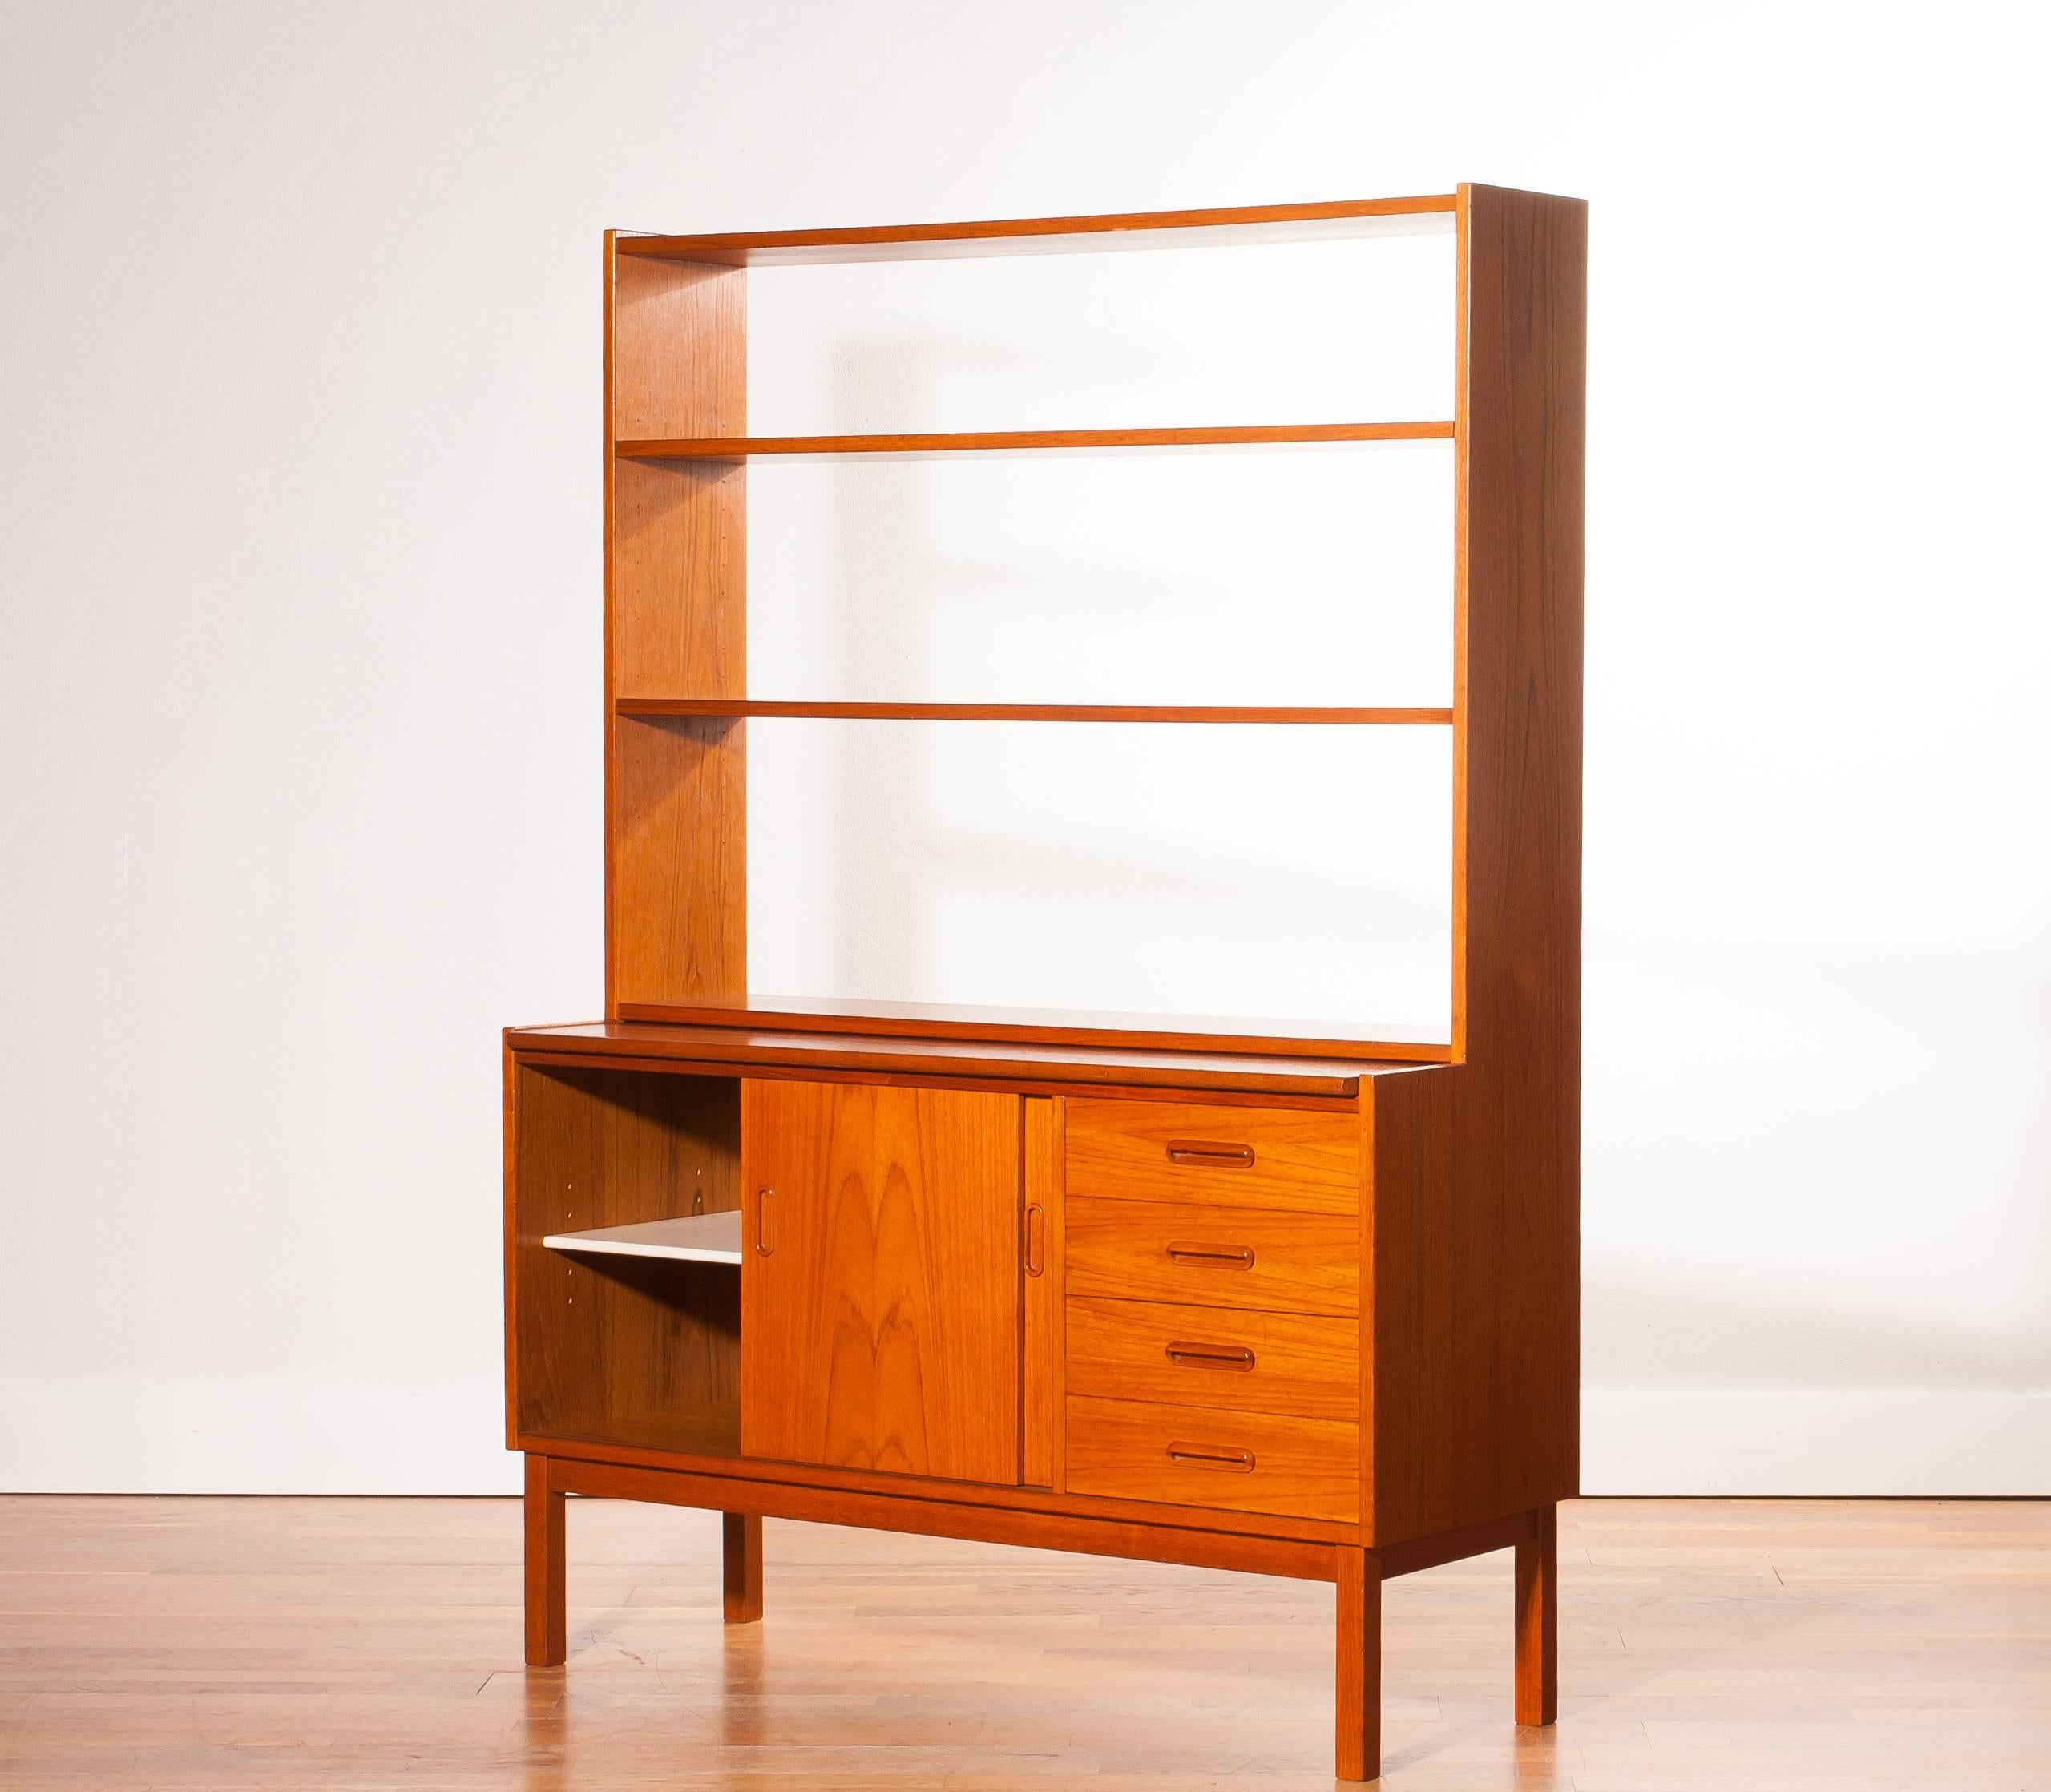 Mid-20th Century 1960s, Teak Book Case with Slidable Writing / Working Space from Sweden